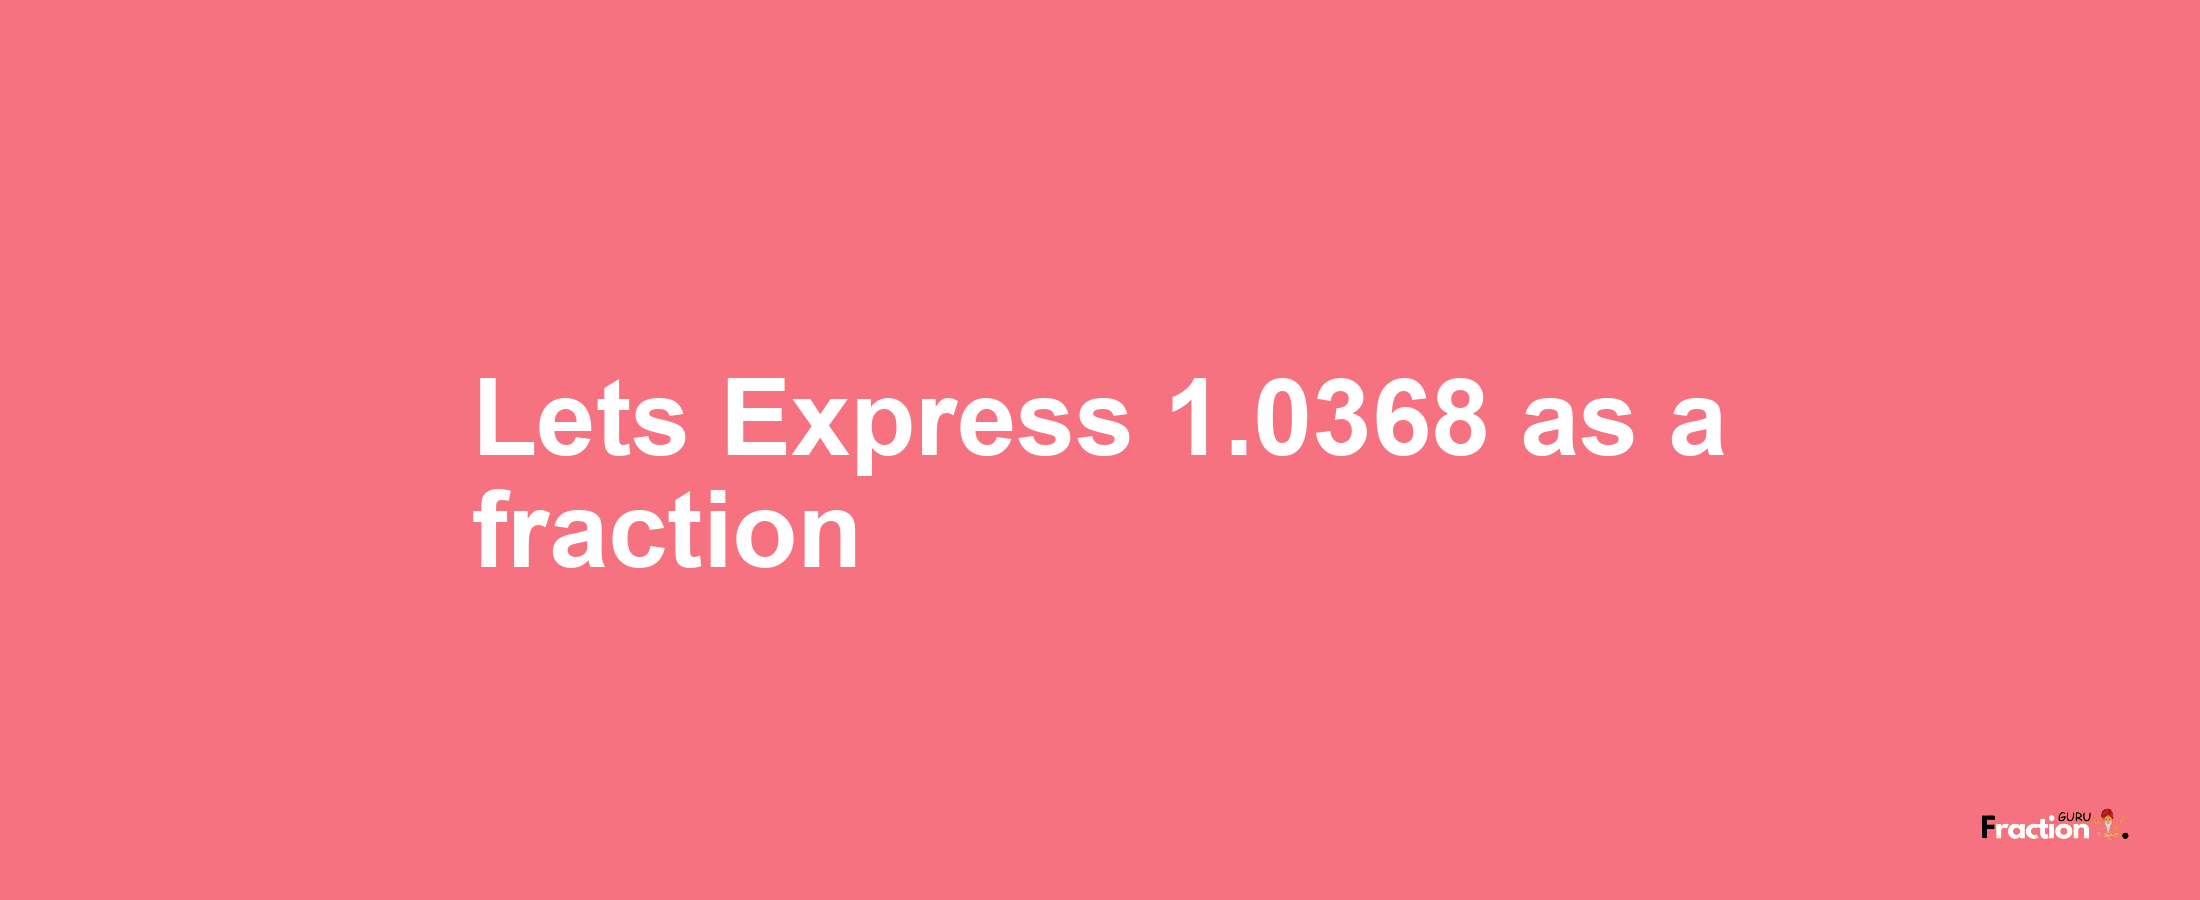 Lets Express 1.0368 as afraction